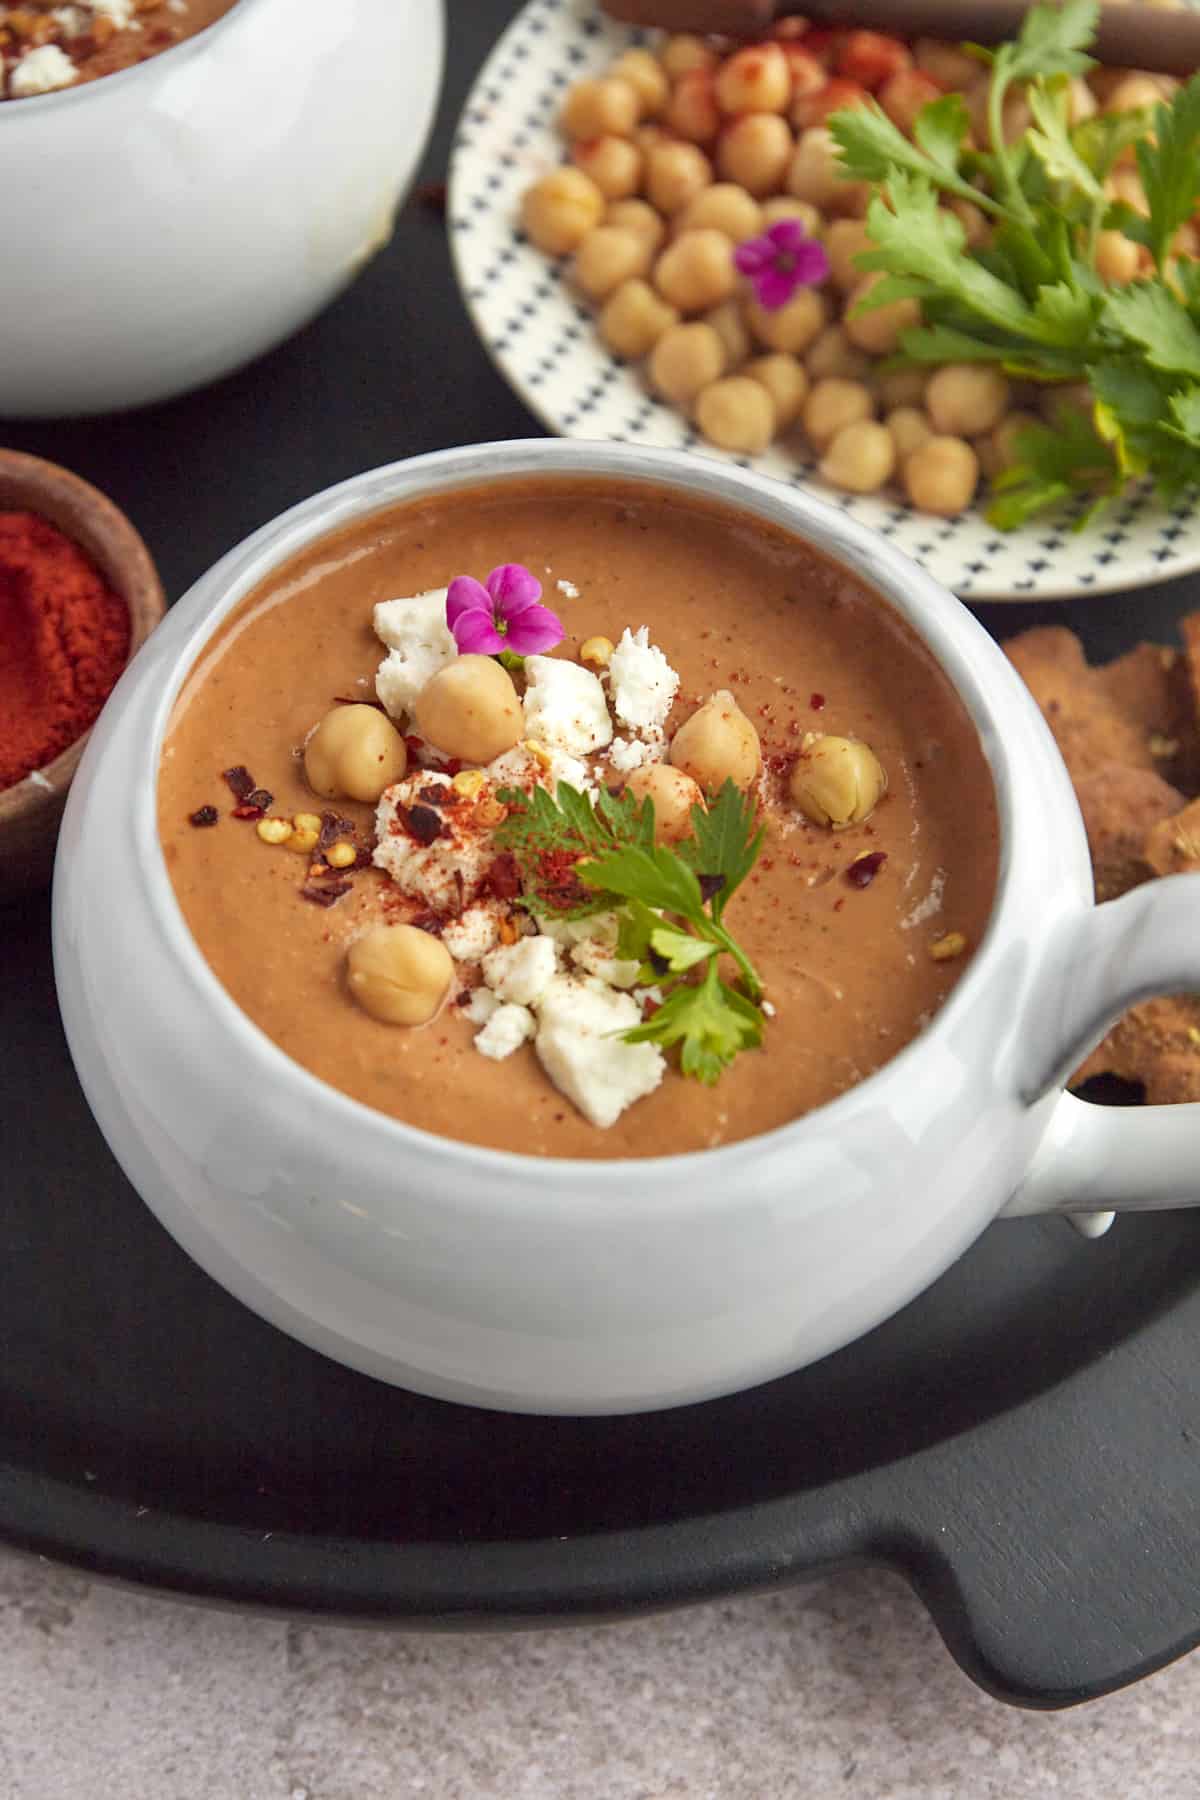 a bowl of Moroccan Spicy Tomato Soup with a plate of chickpeas and fresh parsley in the background for garnishing